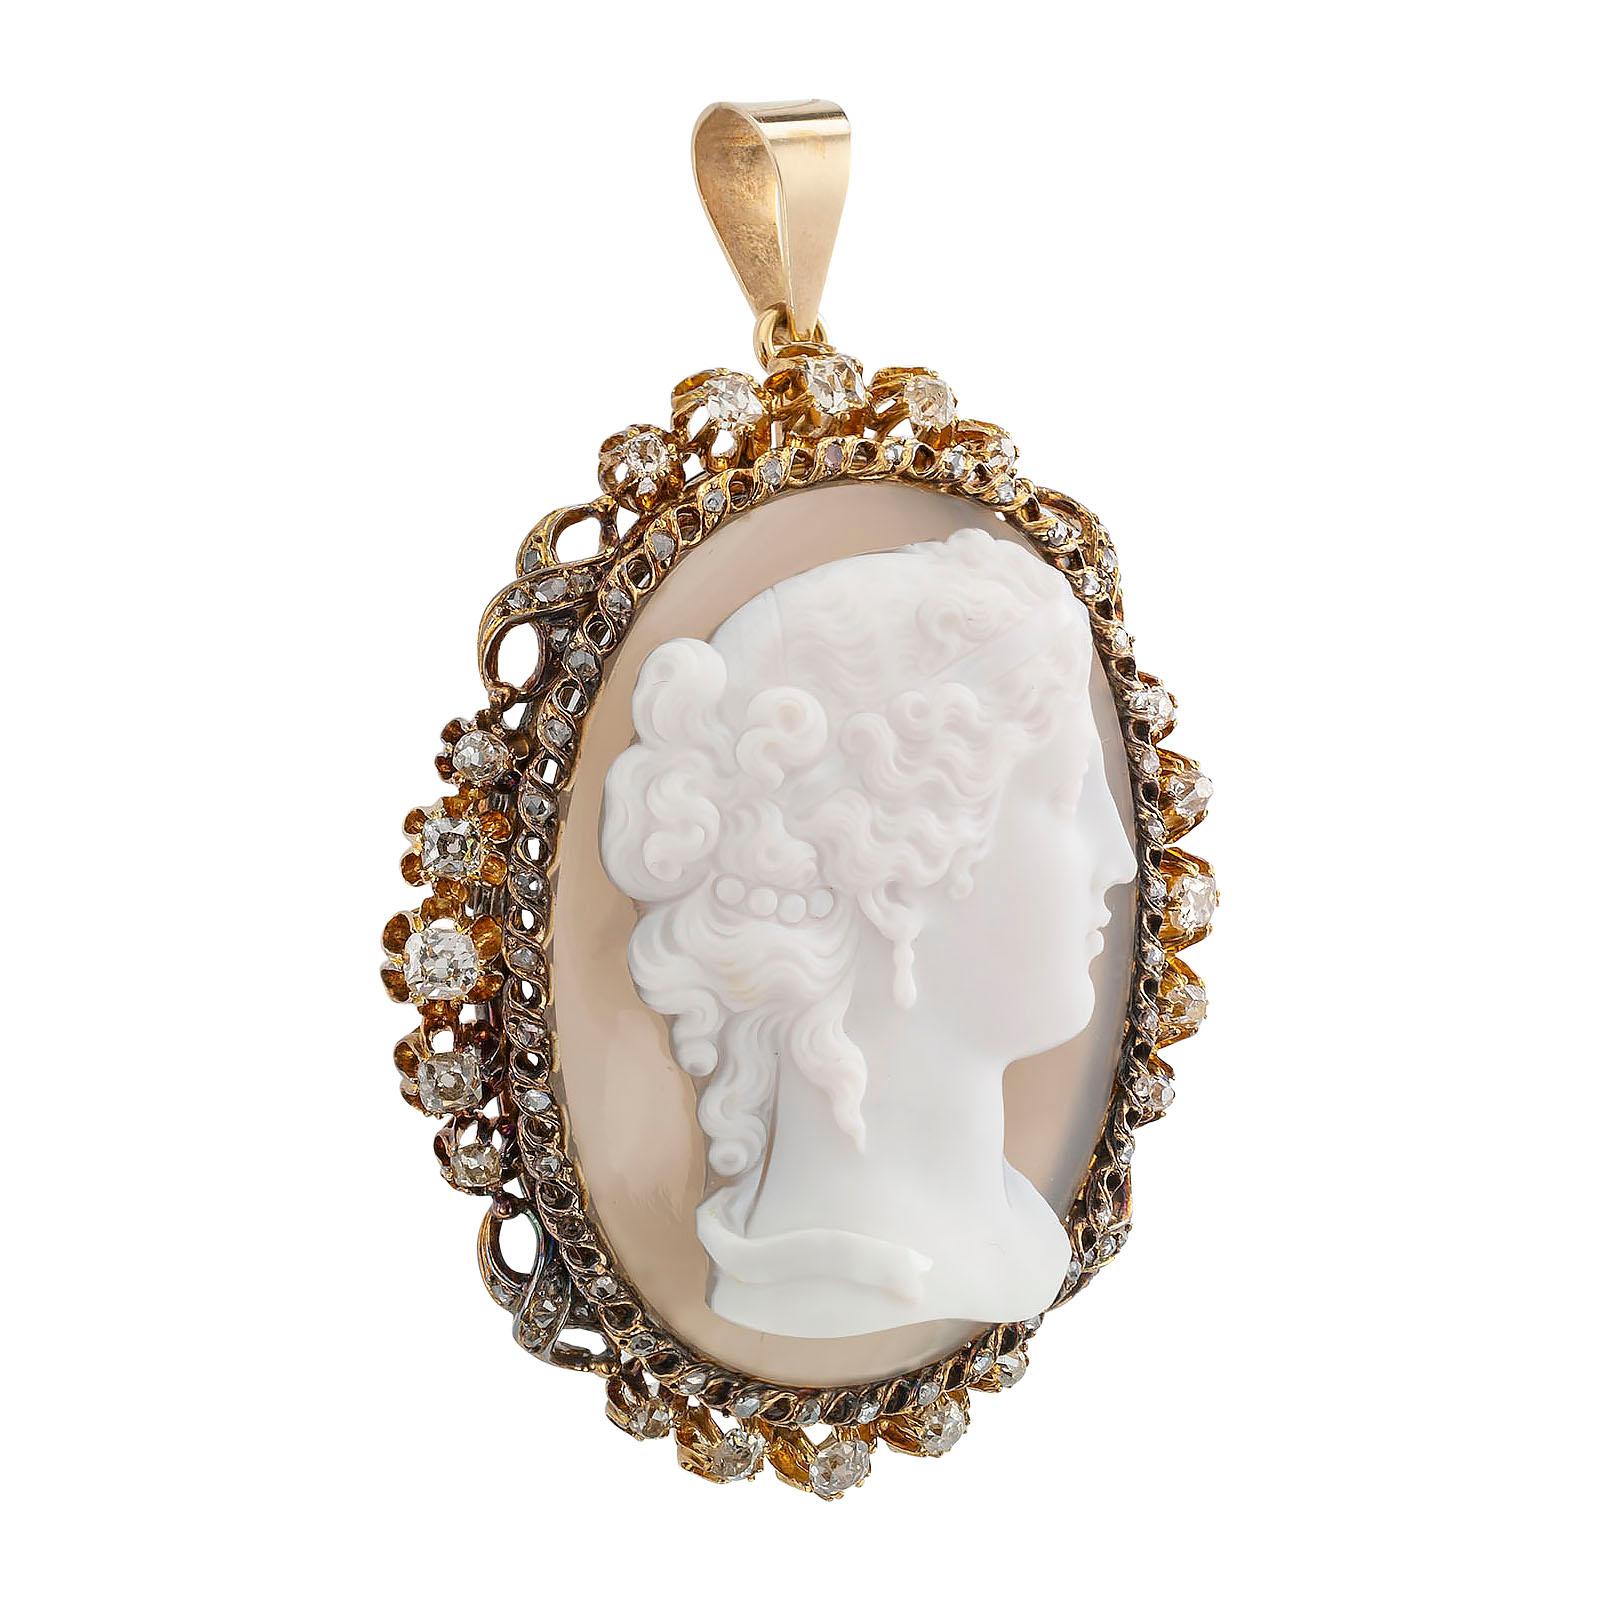  Victorian hardstone diamond gold and silver cameo brooch pendant circa 1880.

DETAILS:
DIAMONDS:  twenty old mine-cut and fifty-nine rose-cut diamonds together totaling approximately 2.50 carats.

METAL:  18-karat yellow gold, silver, and 14-karat